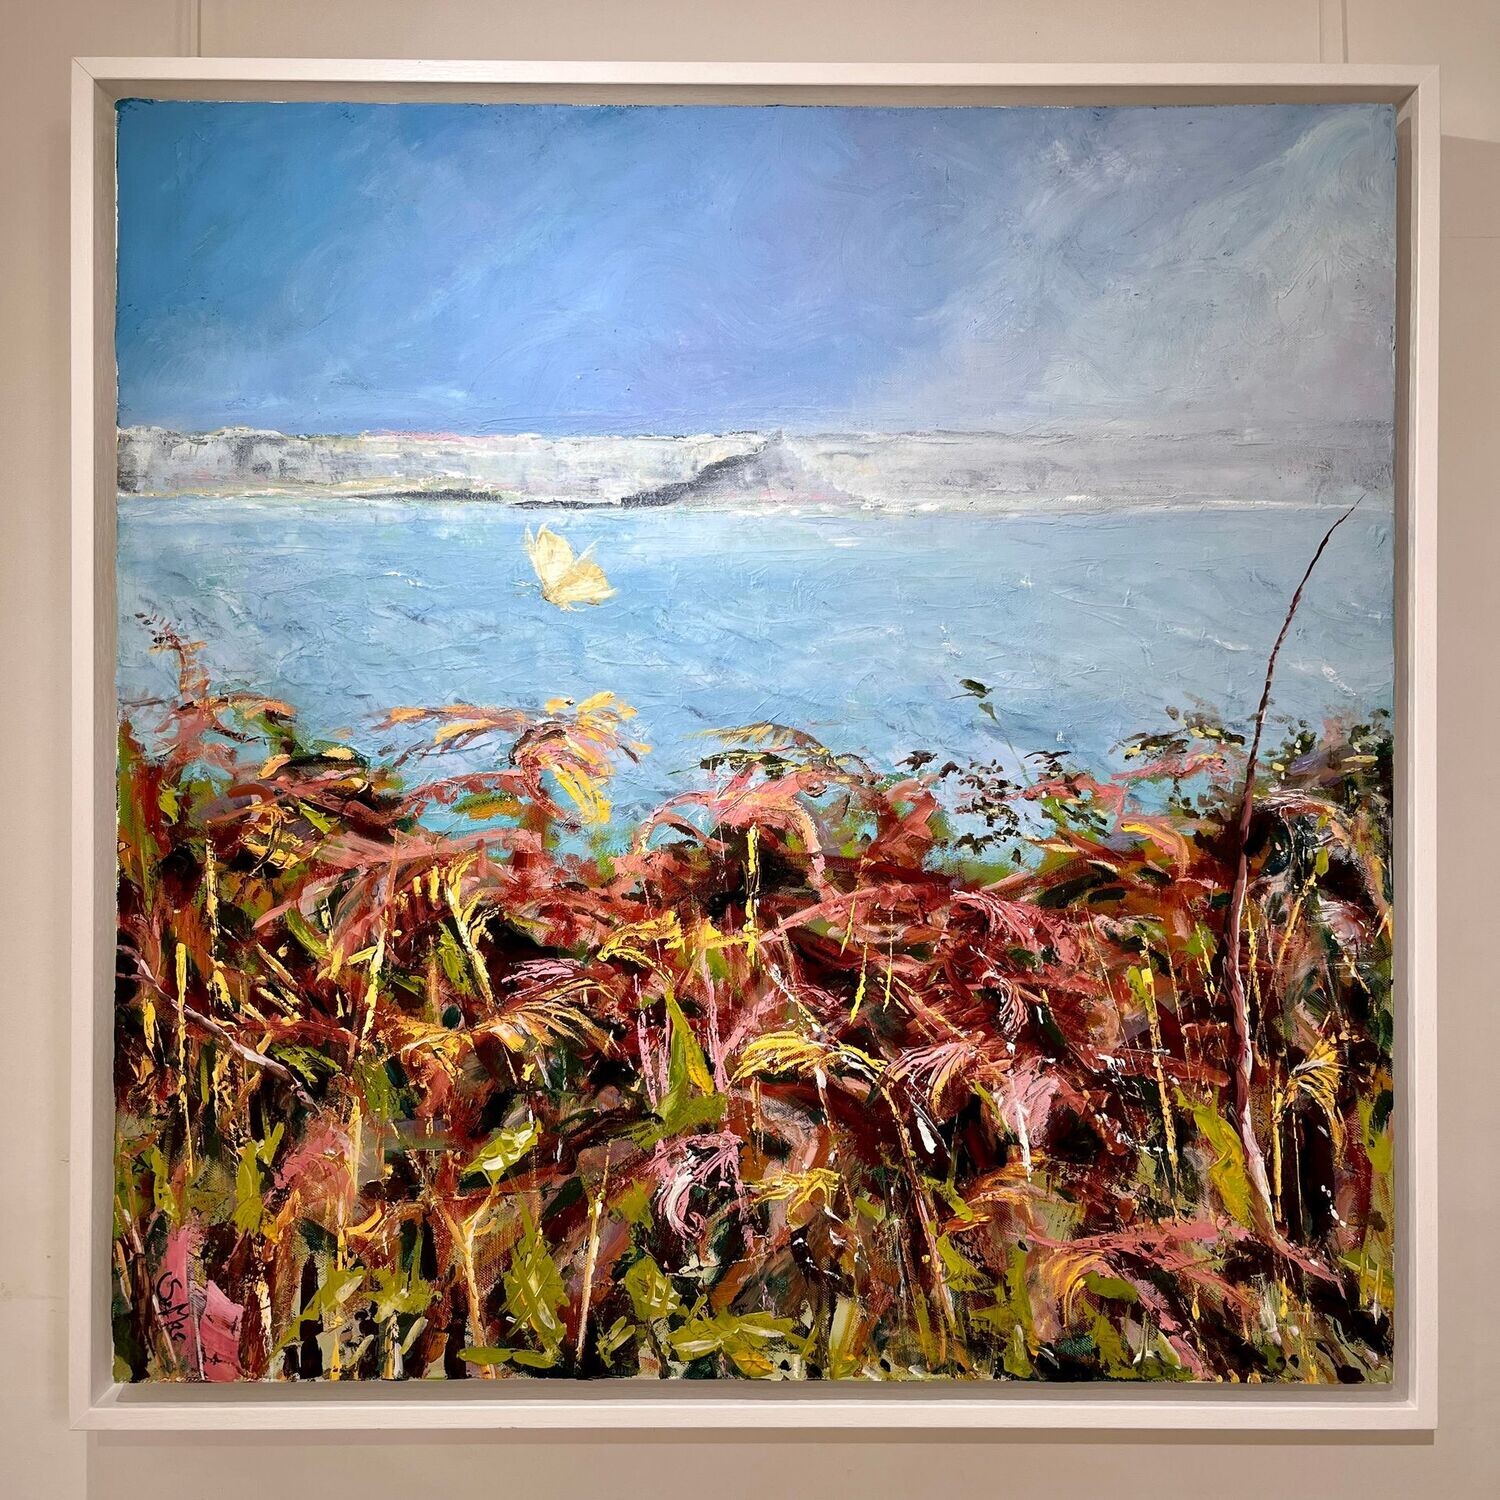 Square painting with orange / green bracken foreground. Above the light aqua sea sits a misty St Michael's Mount. Above is bright blue sky with light coming in from the top right corner. There is a Cabbage White Butterfly flying close above the bracken. Simply framed in white wood. 